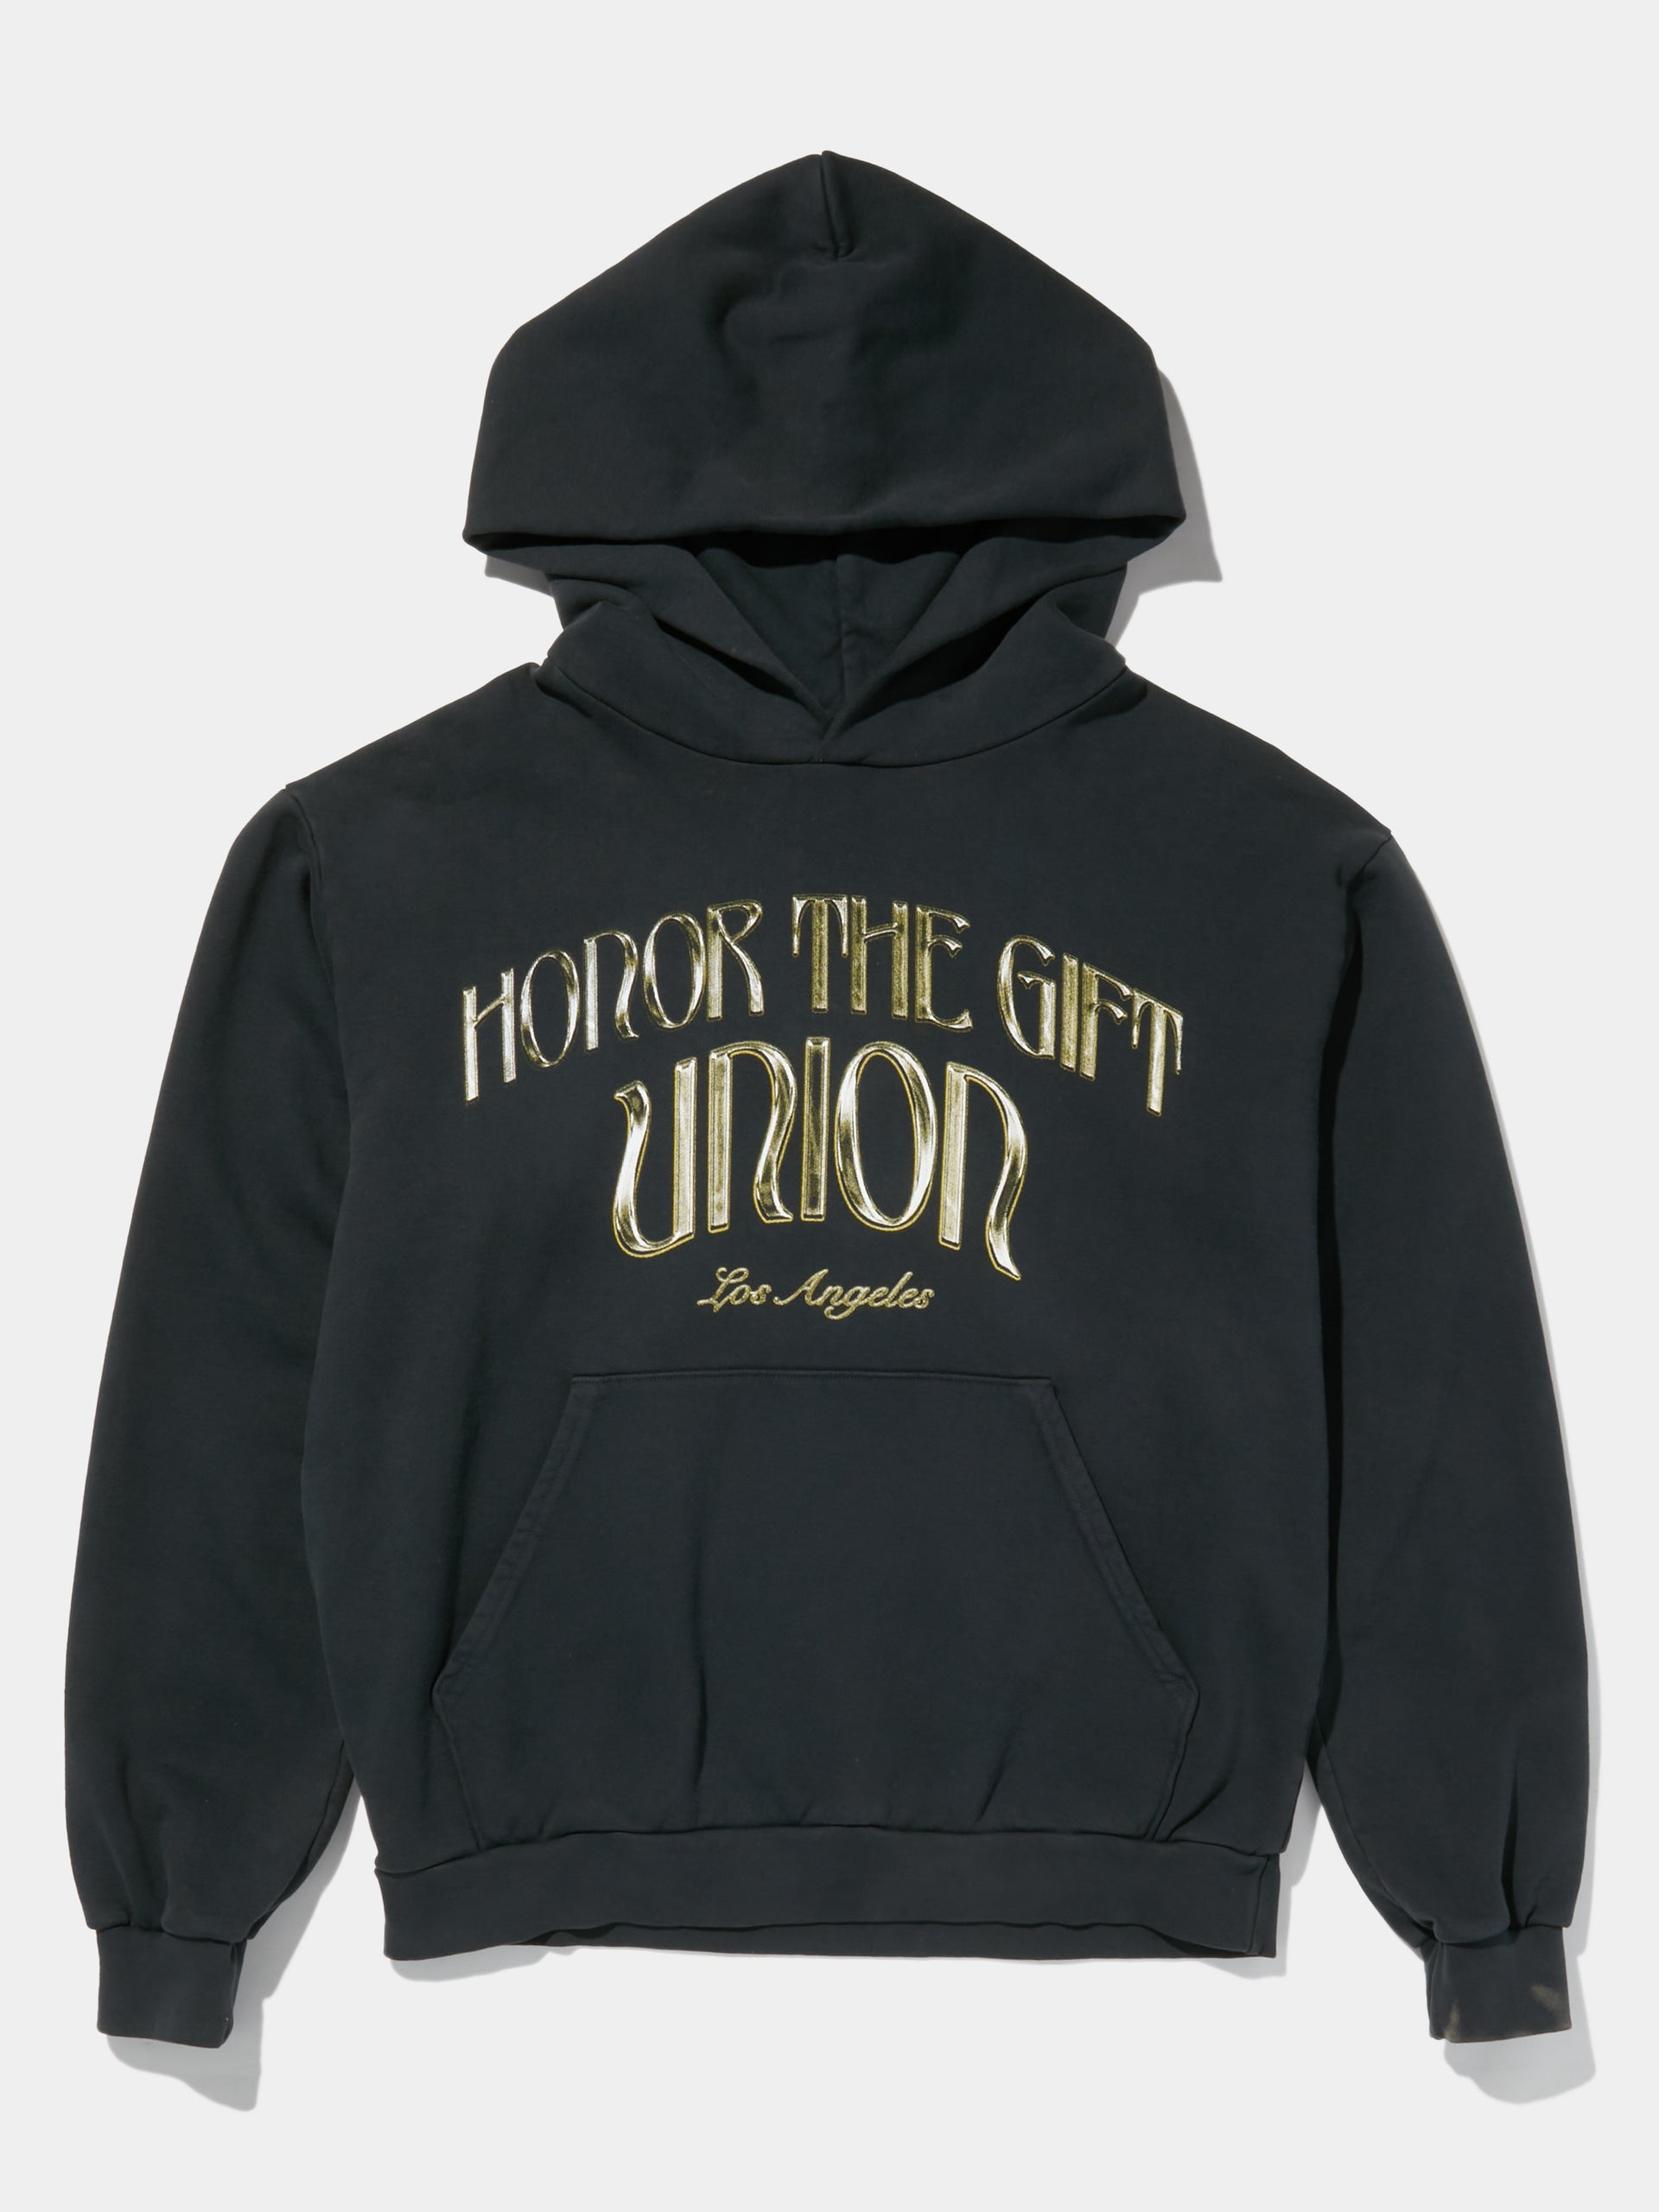 Buy Honor The Gift HTG x UNION HOODIE Online at UNION LOS ANGELES